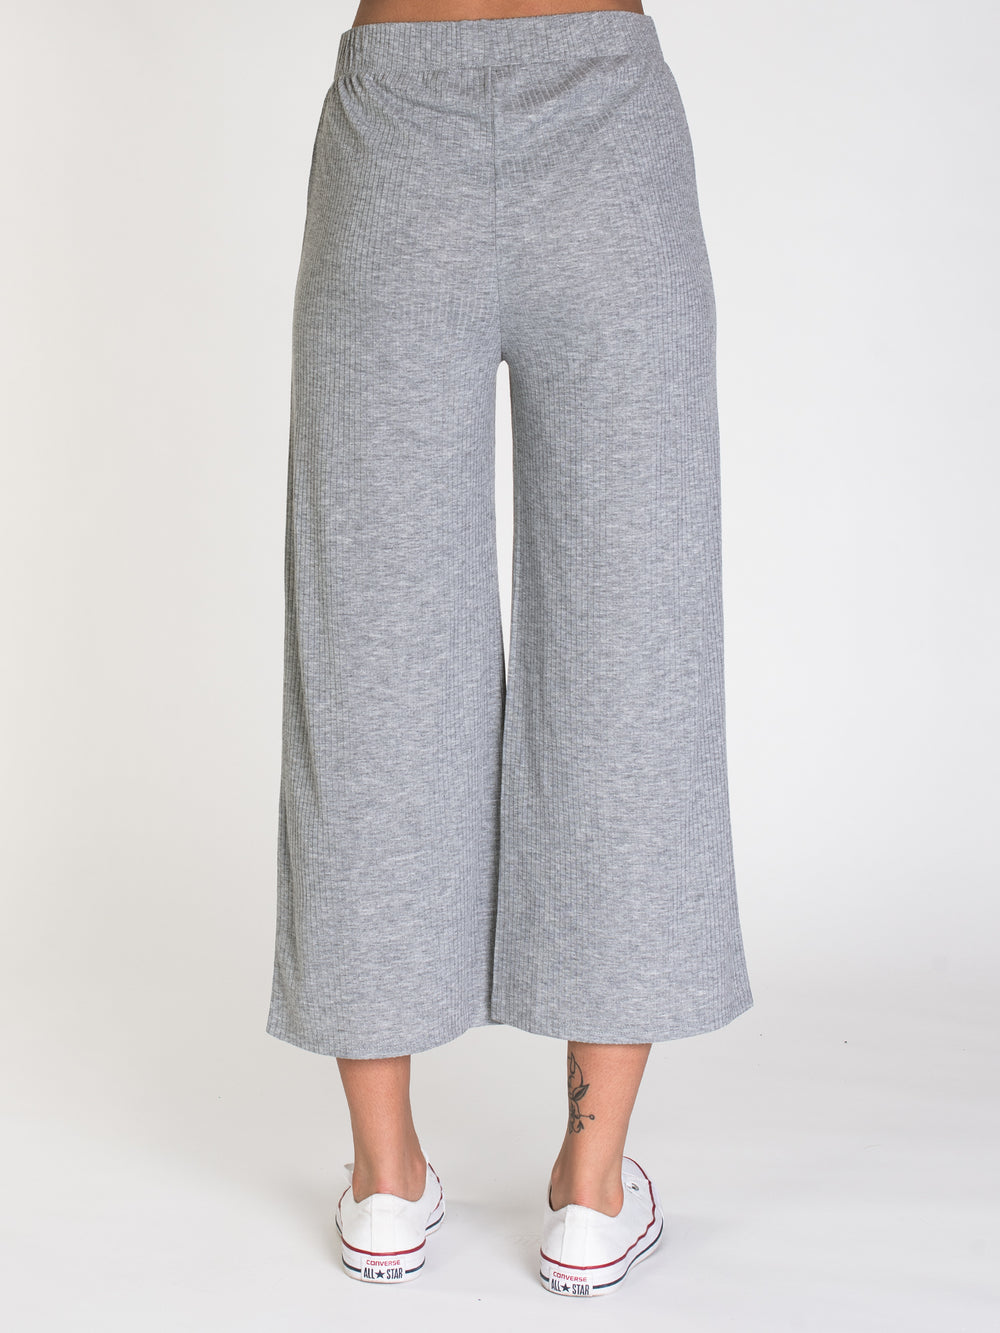 HARLOW BREANNA CROPPED KNIT PANT - DÉSTOCKAGE